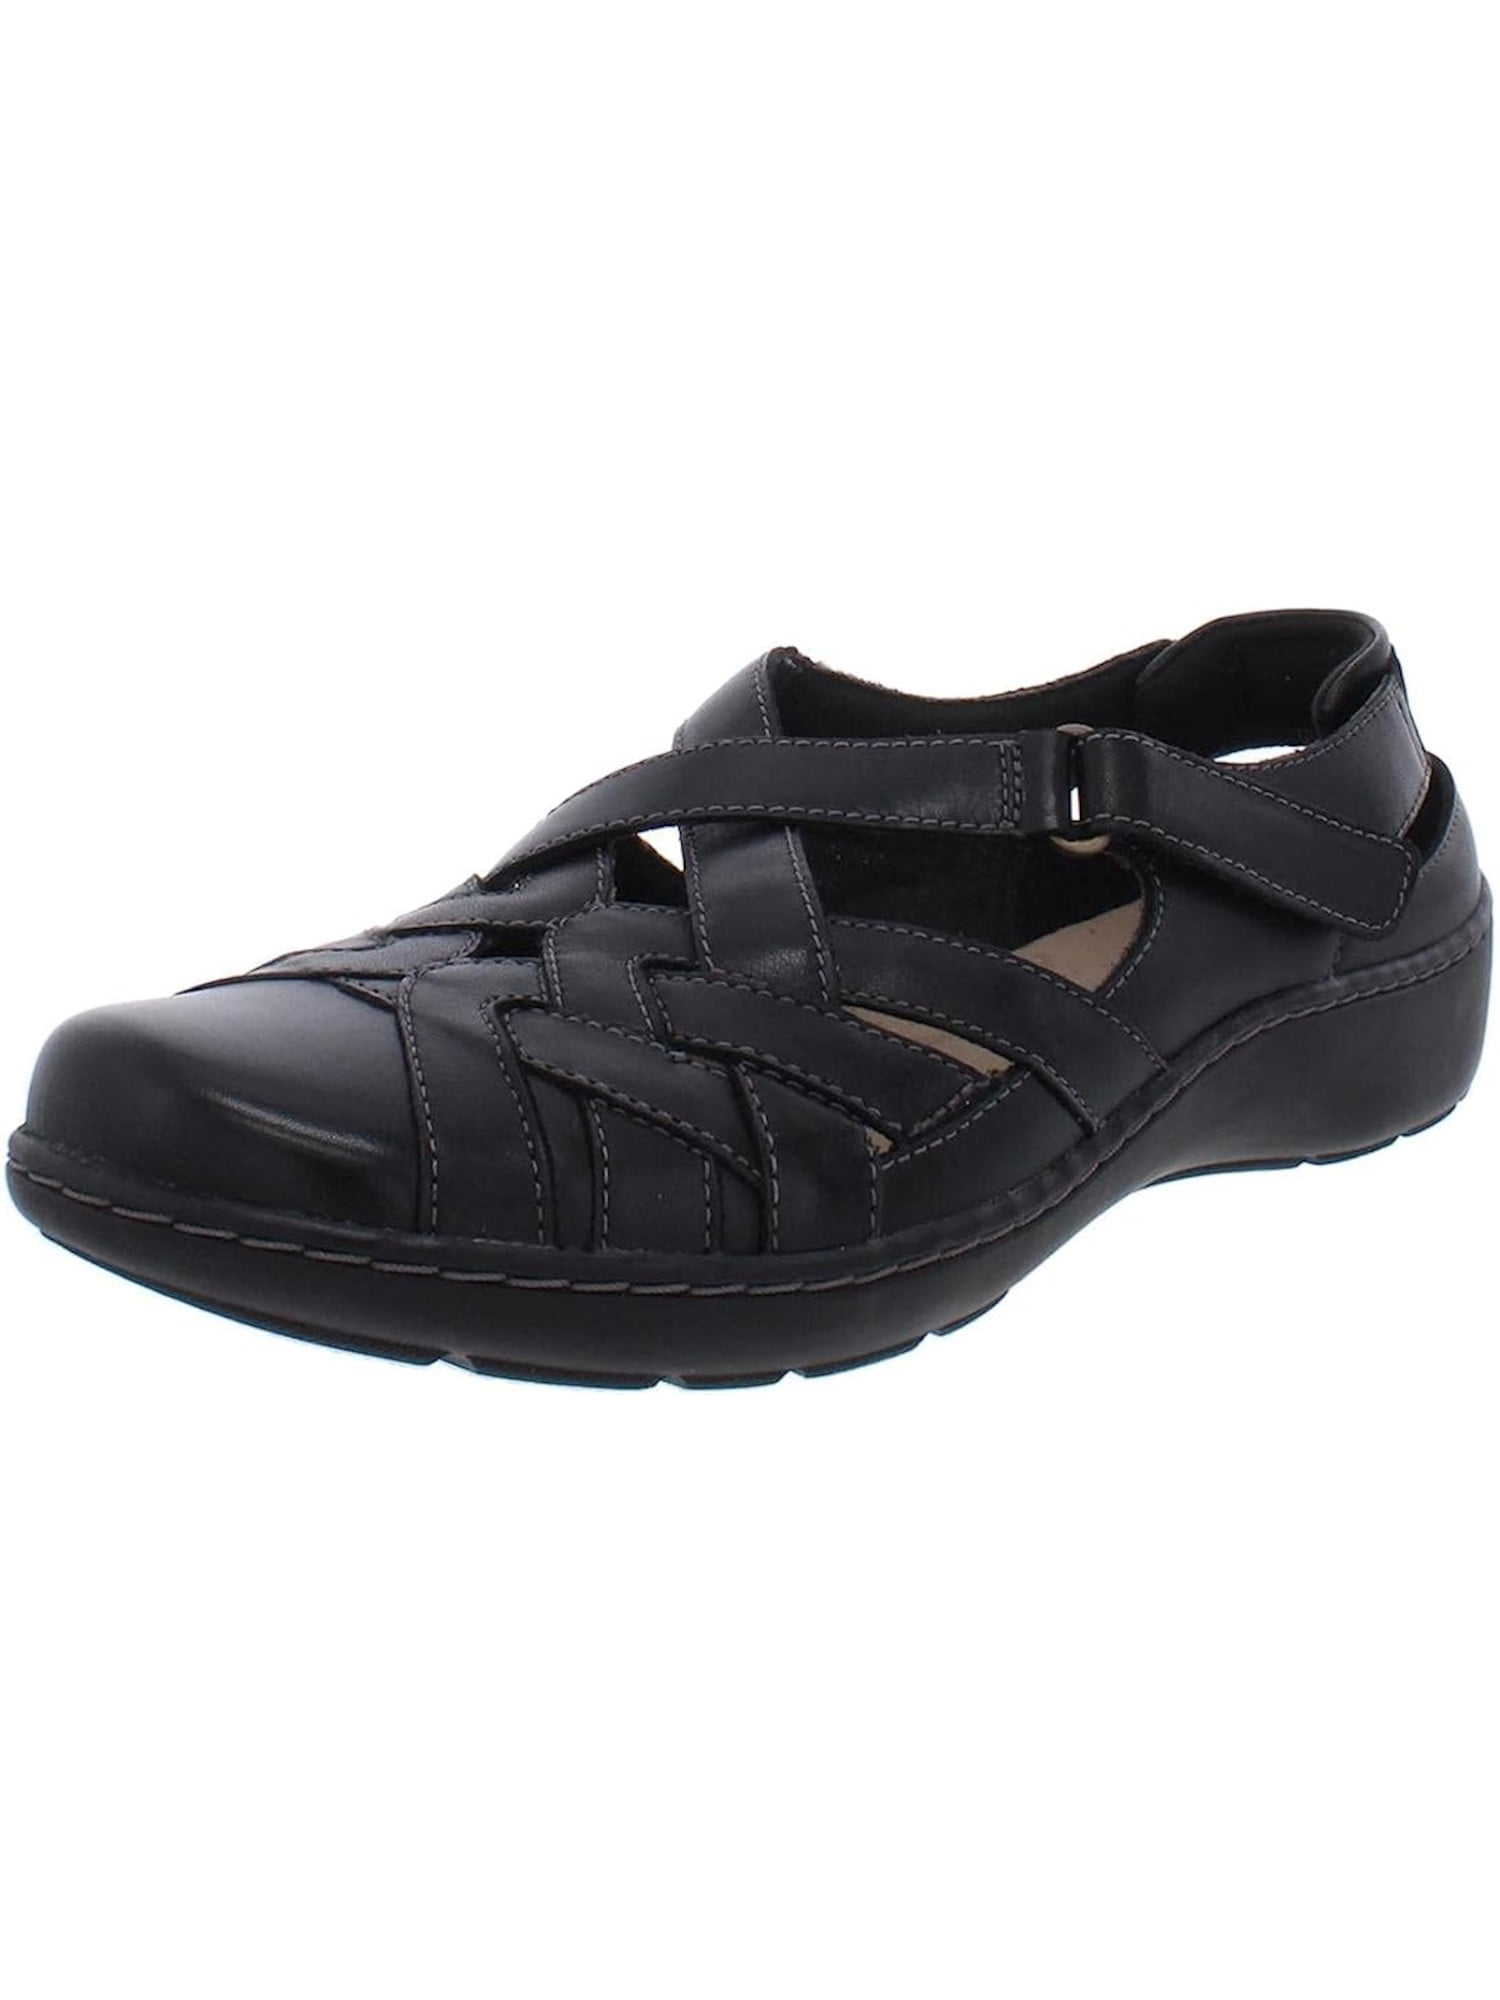 CLARKS COLLECTION Womens Black Lightweight Cut Out Adjustable Cushioned ...